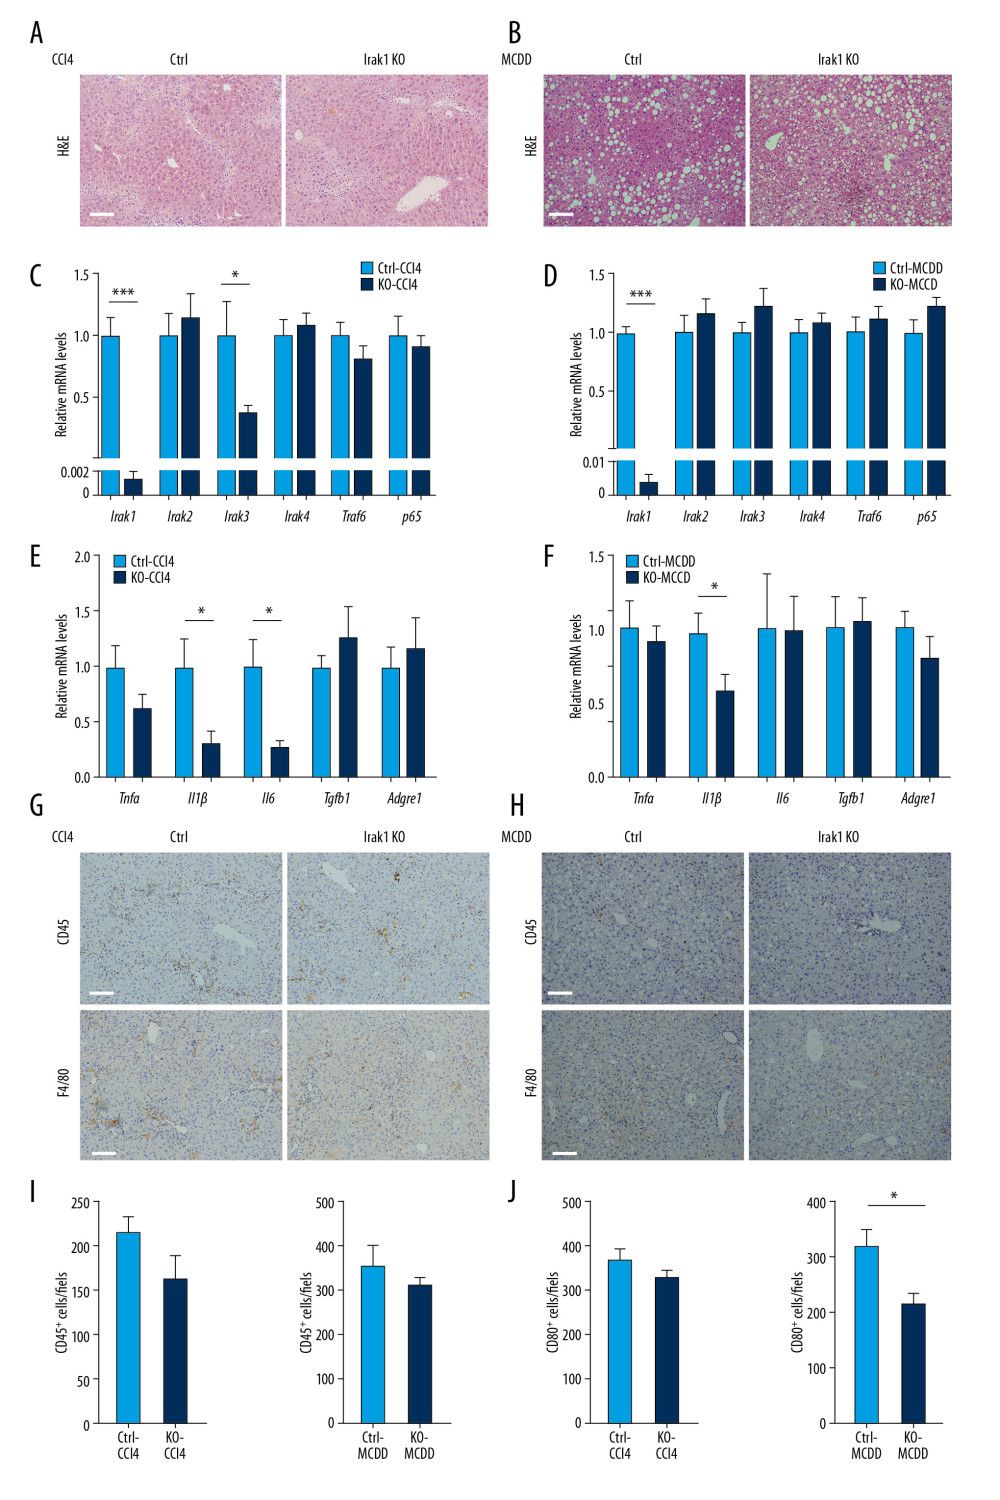 Effects of Irak1 KO on key pro-inflammatory factors and inflammatory cell infiltration in the livers in mouse models of NASH. (A, B) Representative H&E-stained liver sections of Irak1 KO and control mice following (A) treatment with CCl4 for 8 weeks or (B) MCDD feeding for 6 weeks. Scale bars, 100 μm. (C, D) Hepatic Irak1, Irak2, Irak3, Irak4, Traf6, and p65 mRNA levels in Irak1 KO and control mice following (C) treatment with CCl4 for 8 weeks (n=5) or (D) MCDD feeding for 6 weeks (n=5–6). (E, F) Hepatic Tnfα, Il1β, Il6, Tgfb1, and Adgre1 mRNA levels in Irak1 KO and control mice following (E) treatment with CCl4 for 8 weeks (n=5) or (F) MCDD feeding for 6 weeks (n=5–6). (G, H) Representative CD45 (upper part) and F4/80 (bottom part) positively-stained liver sections of Irak1 KO and control mice following (G) treatment with CCl4 for 8 weeks or (H) MCDD feeding for 6 weeks. Scale bars, 100 μm. (I, J) Numbers of (I) CD45-positive and (J) F4/80-positive cells per field from Irak1 KO and control mice following CCl4 treatment for 8 weeks (n=3–4, 5 fields per mouse) or MCDD feeding for 6 weeks (n=3–4, 5 fields per mouse). Data represent mean±SEM. * p<0.05, ** p<0.01, *** p<0.001, by t test.